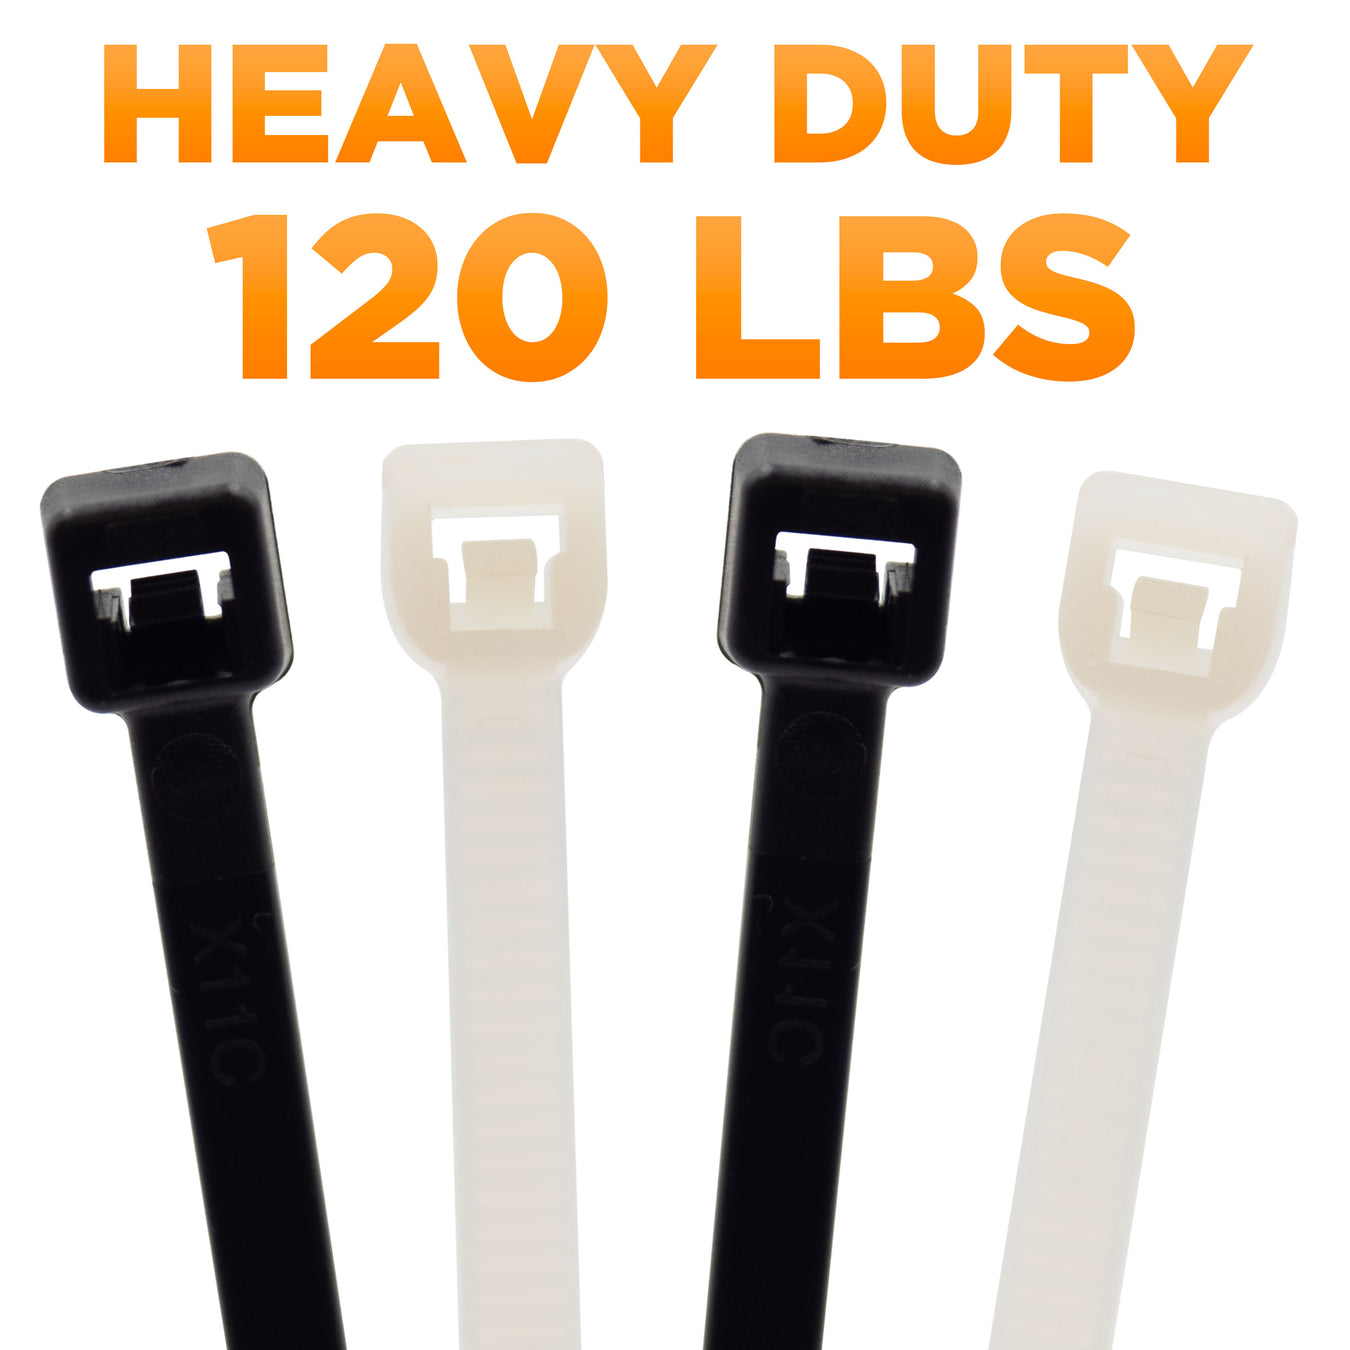 Heavy Duty Cable Ties (120 lbs)